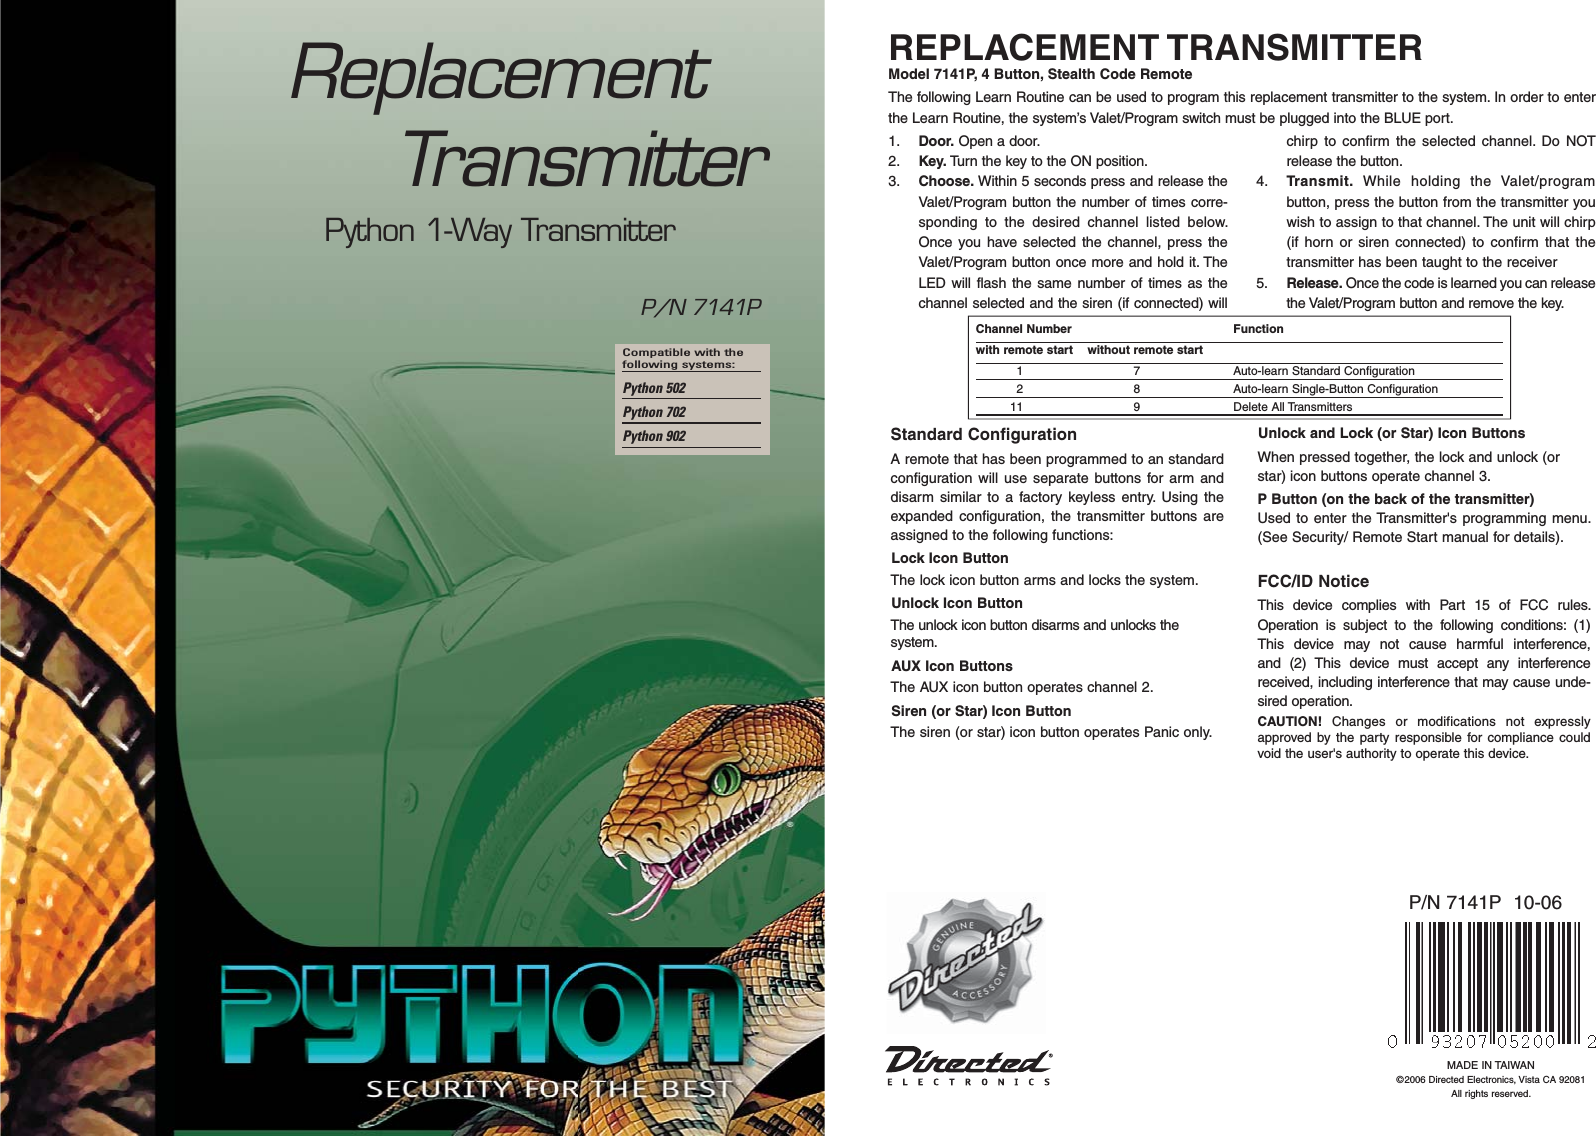 Compatible with the following systems: Python 502Python 702Python 902ReplacementTransmitterREPLACEMENT TRANSMITTERModel 7141P, 4 Button, Stealth Code RemoteThe following Learn Routine can be used to program this replacement transmitter to the system. In order to enter the Learn Routine, the system’s Valet/Program switch must be plugged into the BLUE port.1.  Door. Open a door.2.  Key. Turn the key to the ON position. 3.  Choose. Within 5 seconds press and release the Valet/Program button the number of times corre-sponding to the desired channel listed below. Once you have selected the channel, press the Valet/Program button once more and hold it. The LED will flash the same number of times as the channel selected and the siren (if connected) will chirp to confirm the selected channel. Do NOT release the button.4.  Transmit. While holding the Valet/program button, press the button from the transmitter you wish to assign to that channel. The unit will chirp (if horn or siren connected) to confirm that the transmitter has been taught to the receiver 5.  Release. Once the code is learned you can release the Valet/Program button and remove the key. Channel Number    Functionwith remote start    without remote start  1  7  Auto-learn Standard Configuration  2  8  Auto-learn Single-Button Configuration 11  9  Delete All TransmittersStandard Configuration A remote that has been programmed to an standard configuration will use separate buttons for arm and disarm similar to a factory keyless entry. Using the expanded configuration, the transmitter buttons are assigned to the following functions:Lock Icon ButtonThe lock icon button arms and locks the system.Unlock Icon ButtonThe unlock icon button disarms and unlocks the system.AUX Icon ButtonsThe AUX icon button operates channel 2.Siren (or Star) Icon ButtonThe siren (or star) icon button operates Panic only.Unlock and Lock (or Star) Icon ButtonsWhen pressed together, the lock and unlock (or star) icon buttons operate channel 3.P Button (on the back of the transmitter)Used to enter the Transmitter&apos;s programming menu. (See Security/ Remote Start manual for details).FCC/ID NoticeThis device complies with Part 15 of FCC rules. Operation is subject to the following conditions: (1) This device may not cause harmful interference, and (2) This device must accept any interference received, including interference that may cause unde-sired operation.CAUTION! Changes or modifications not expressly approved by the party responsible for compliance could void the user&apos;s authority to operate this device.MADE IN TAIWAN©2006 Directed Electronics, Vista CA 92081All rights reserved.P/N 7141P  10-06P/N 7141PPython 1-Way Transmitter